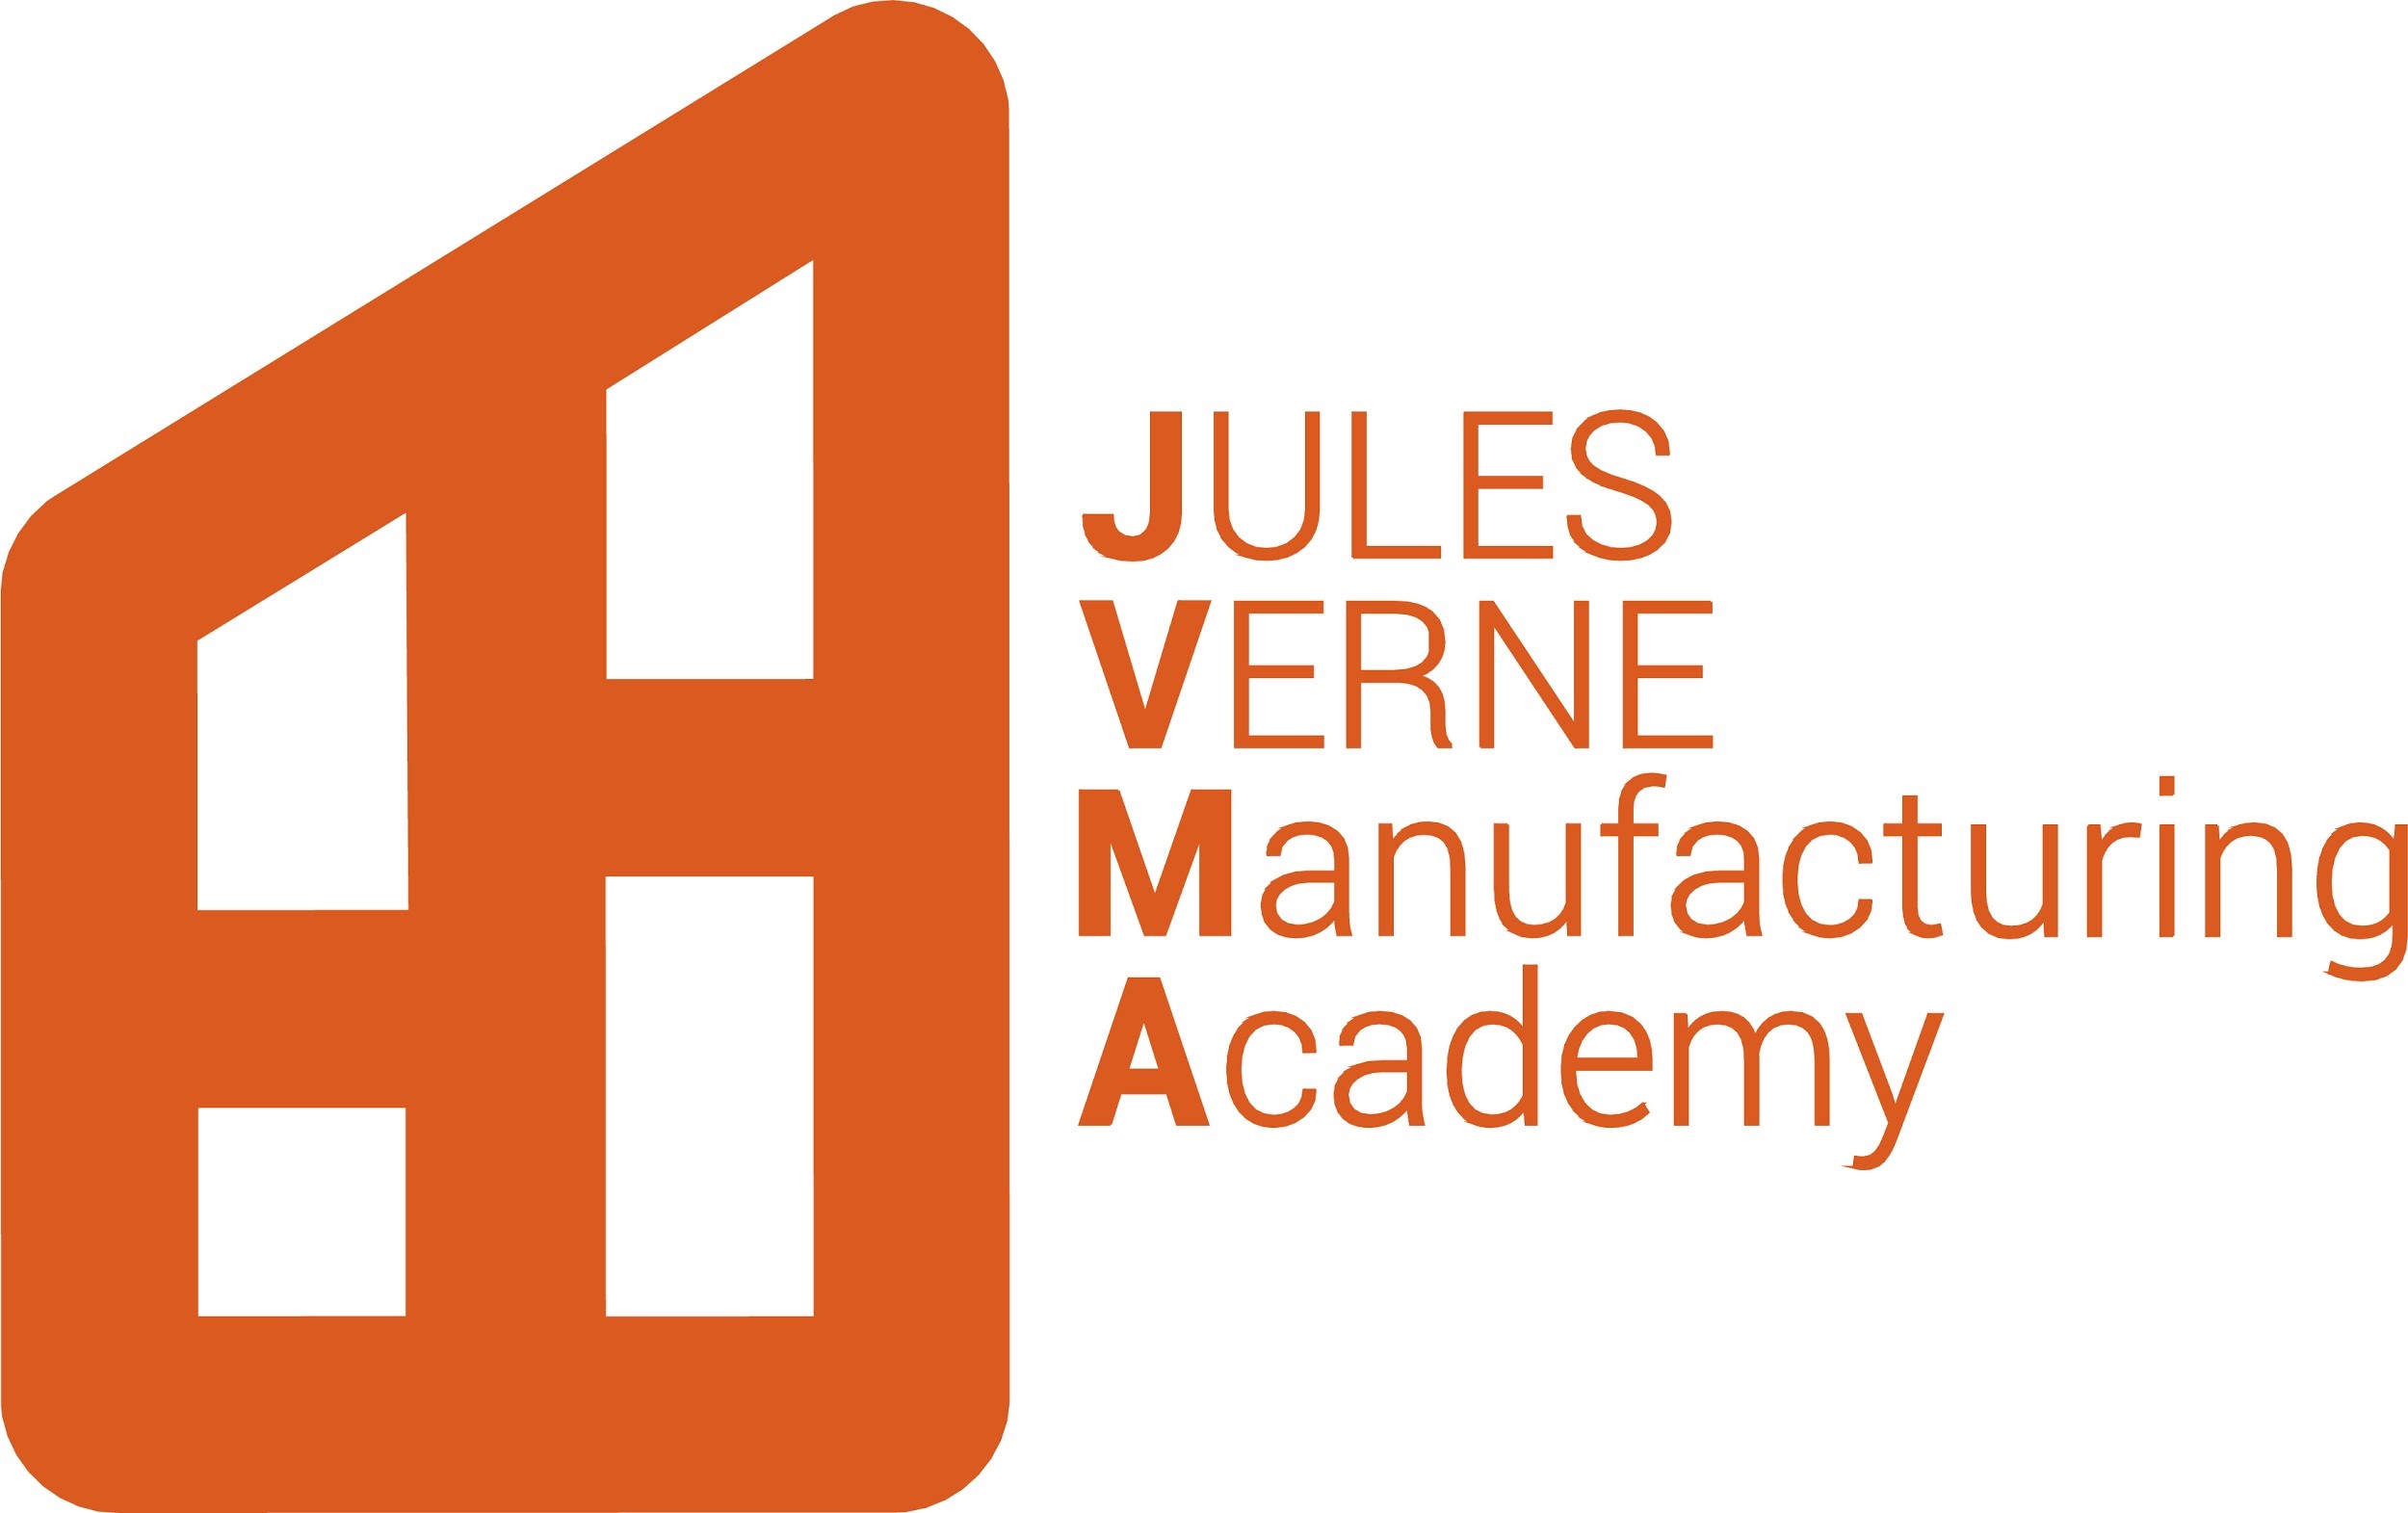 JULES VERNE MANUFACTURING ACADEMY (JVMA)